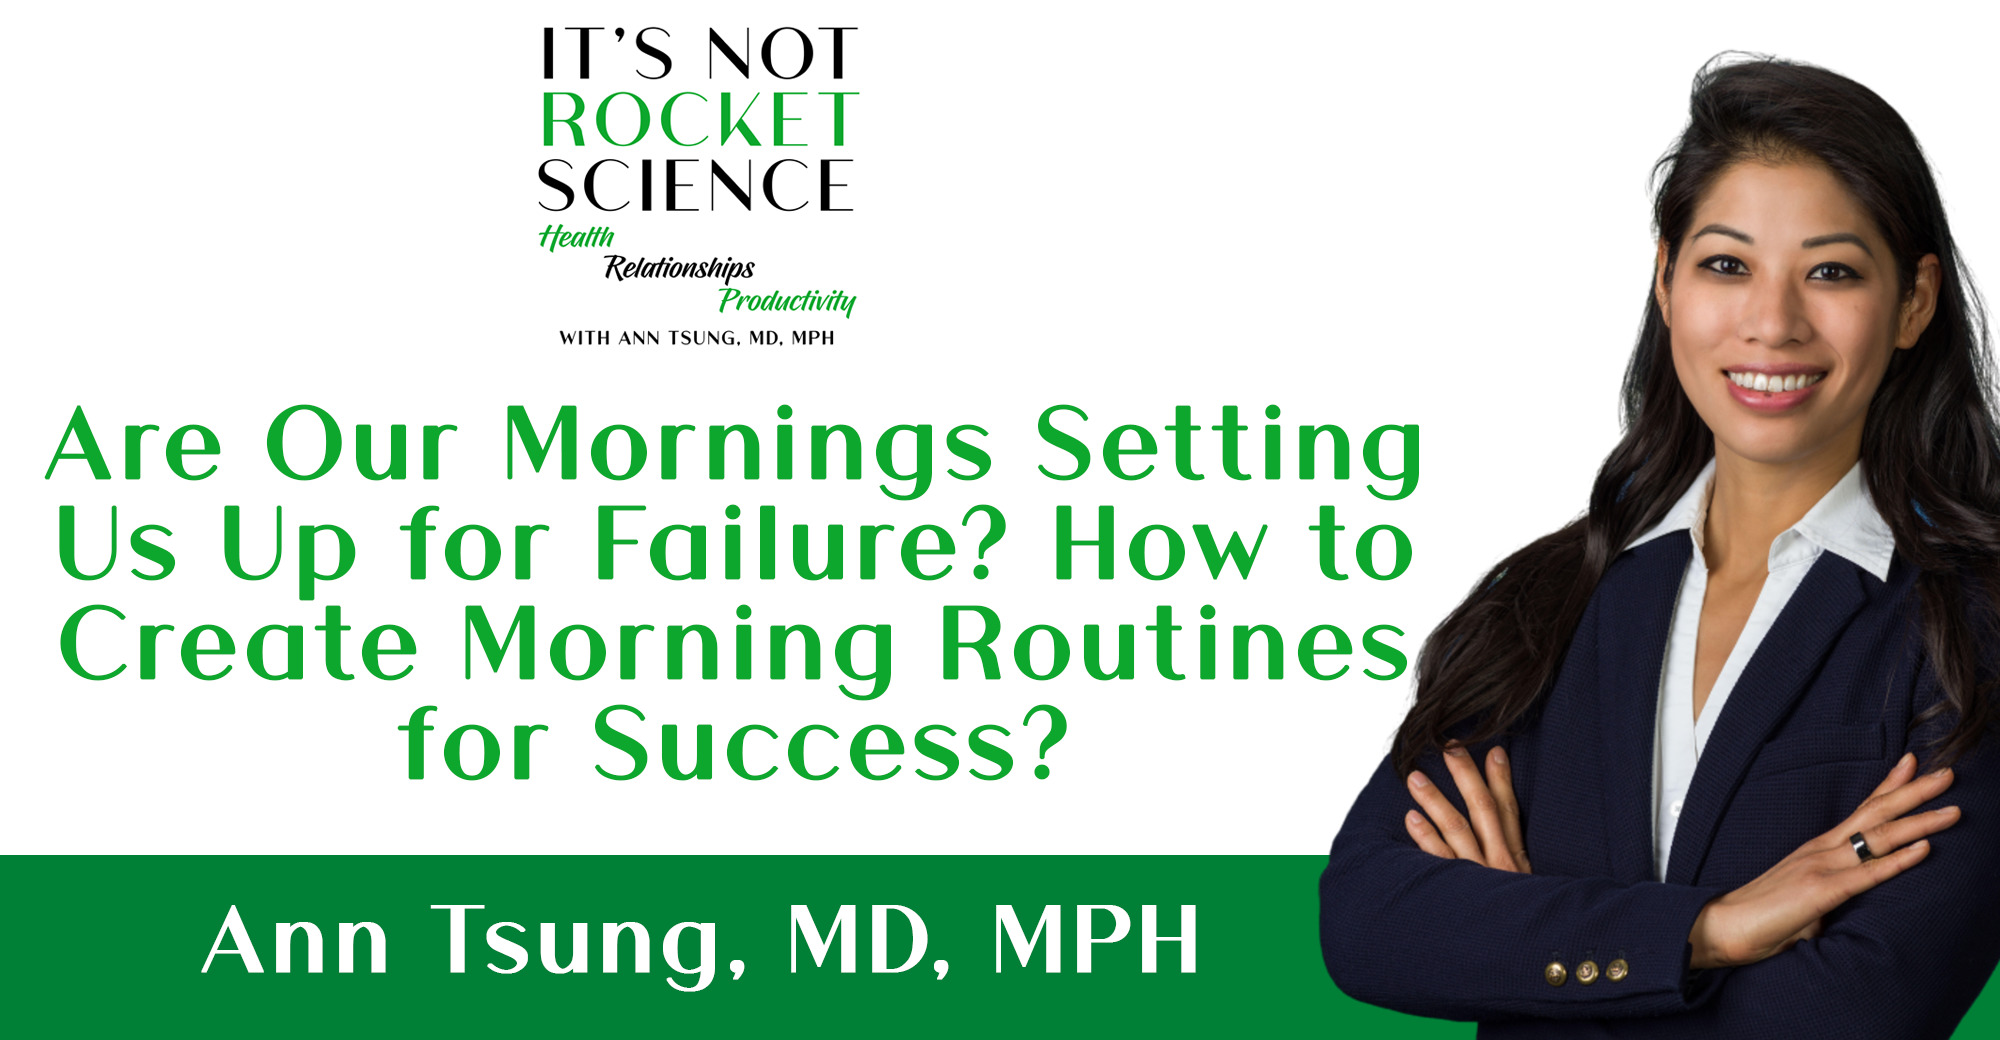 005 – Are Our Mornings Setting Us Up for Failure? How to Create Morning Routines for Success?